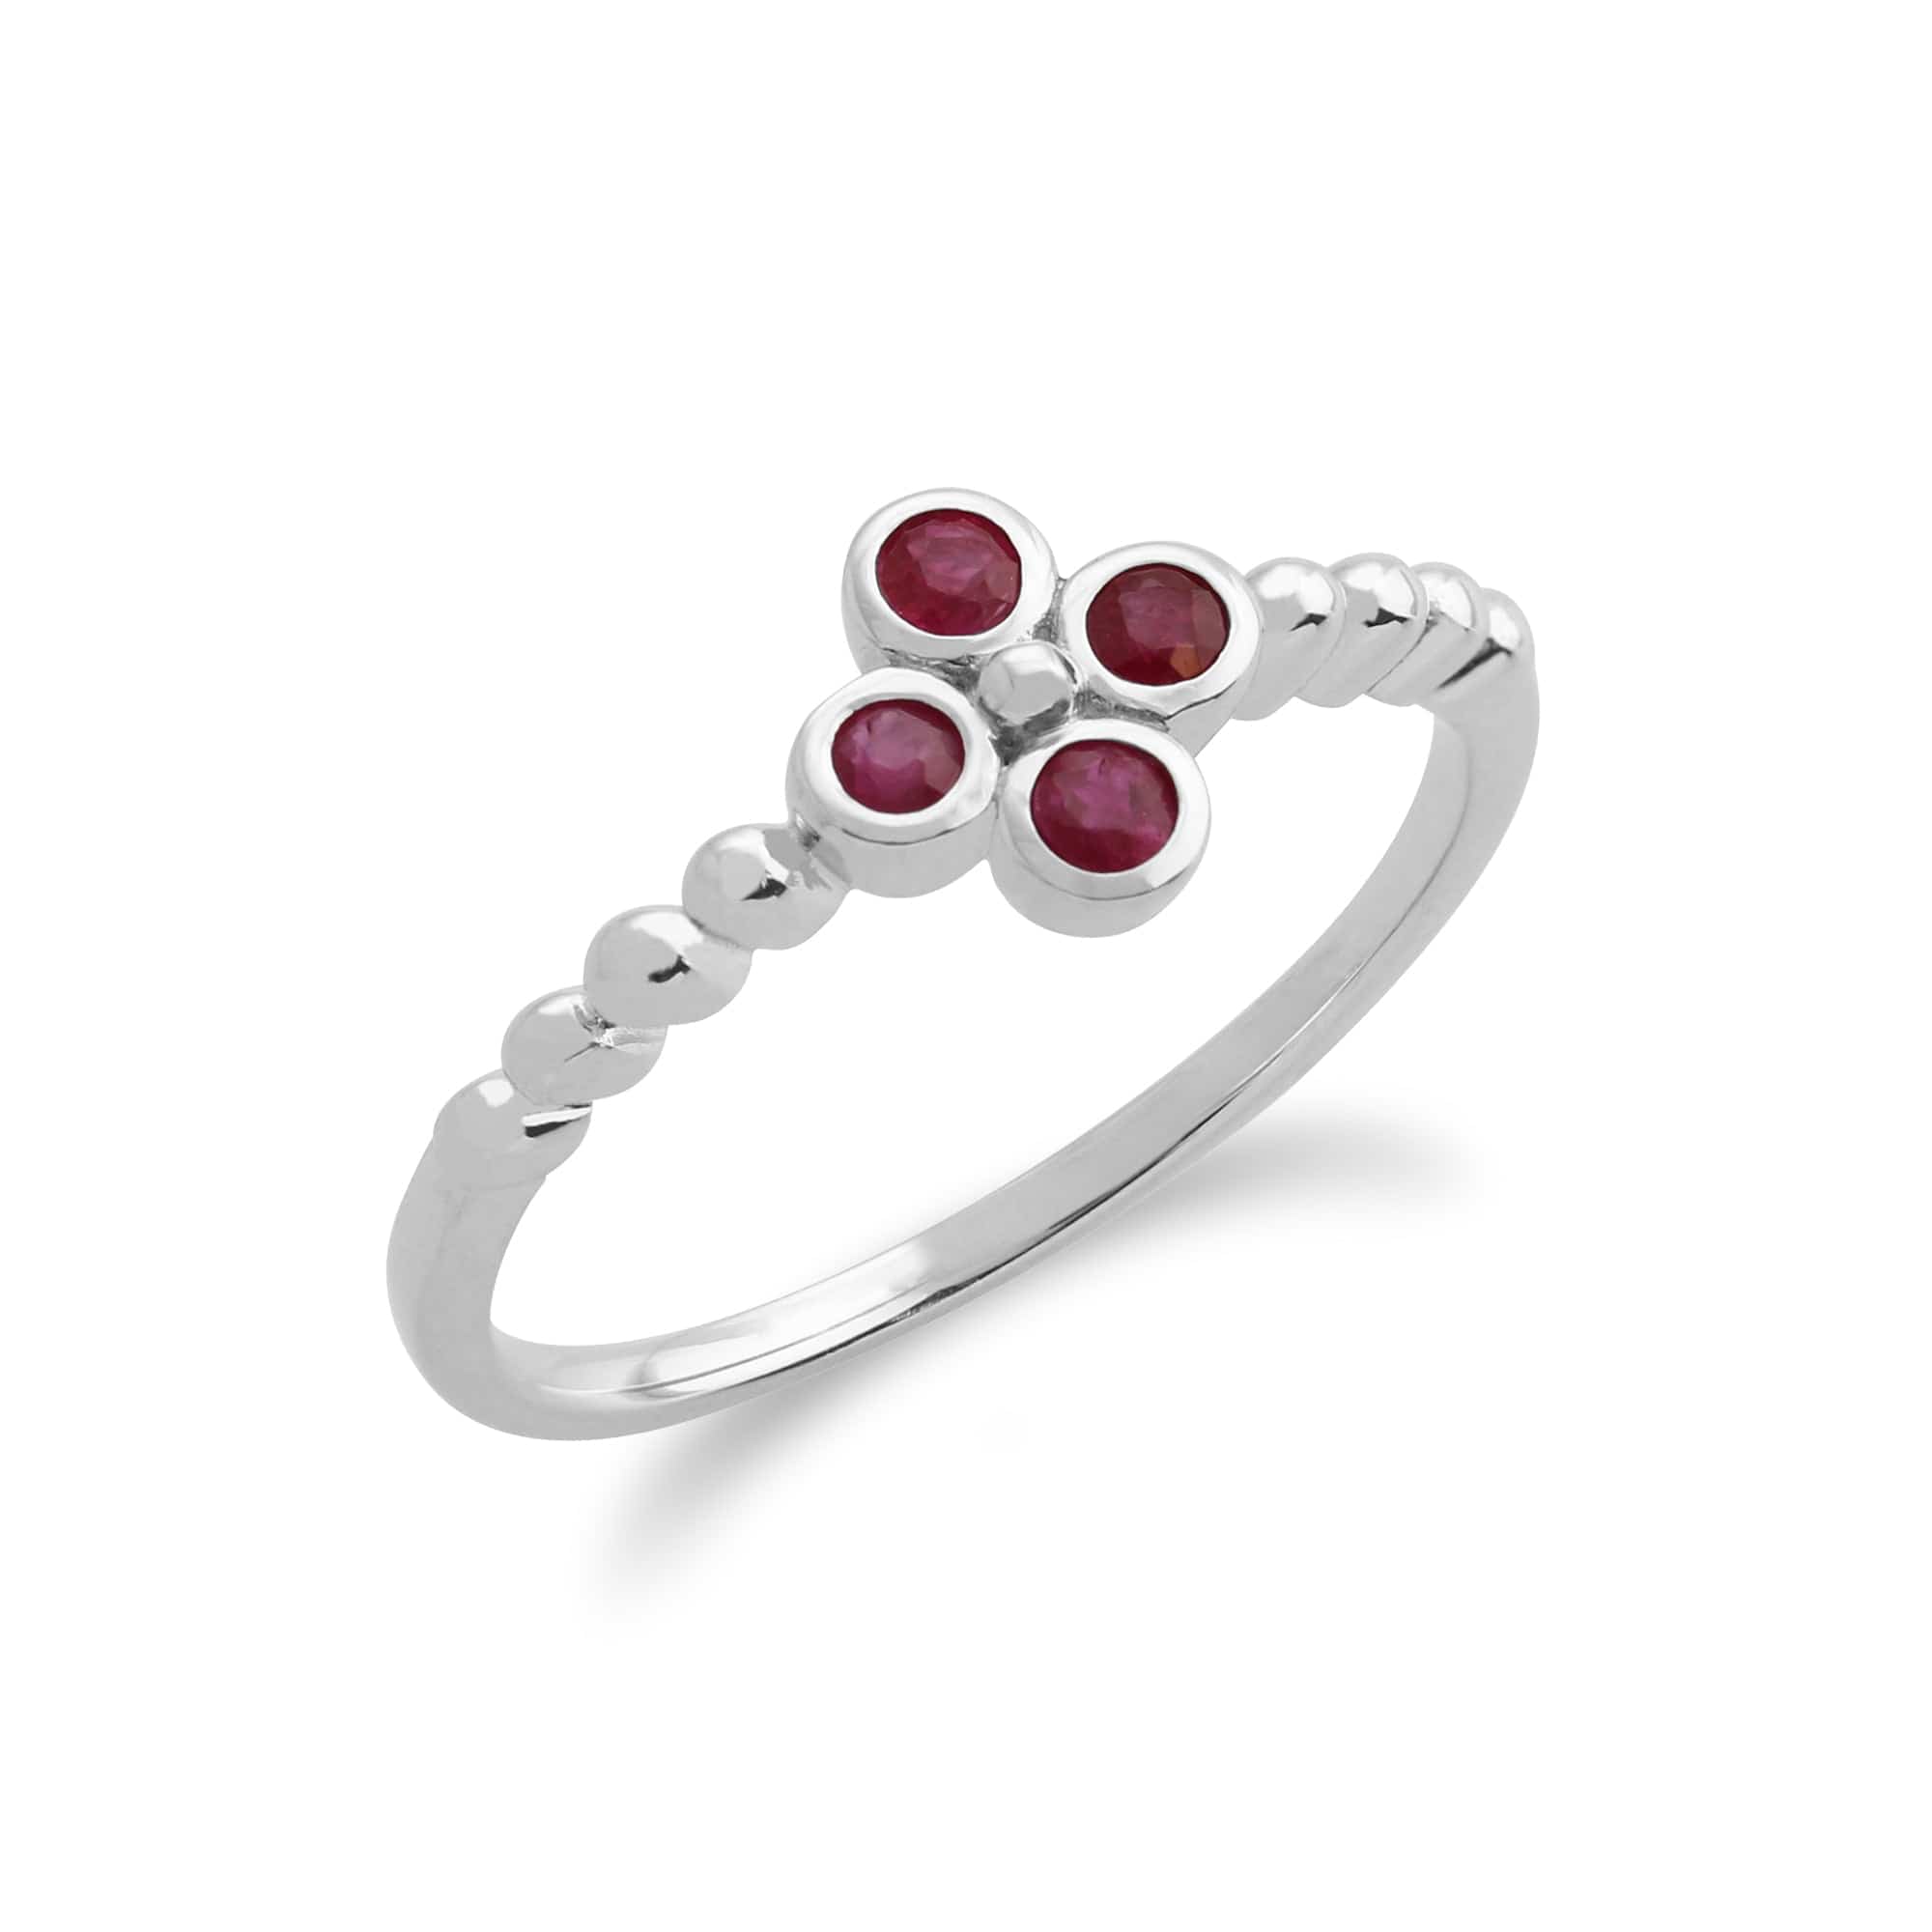 Floral Round Ruby Clover Pendant & Ring Set in 925 Sterling Silver - Gemondo